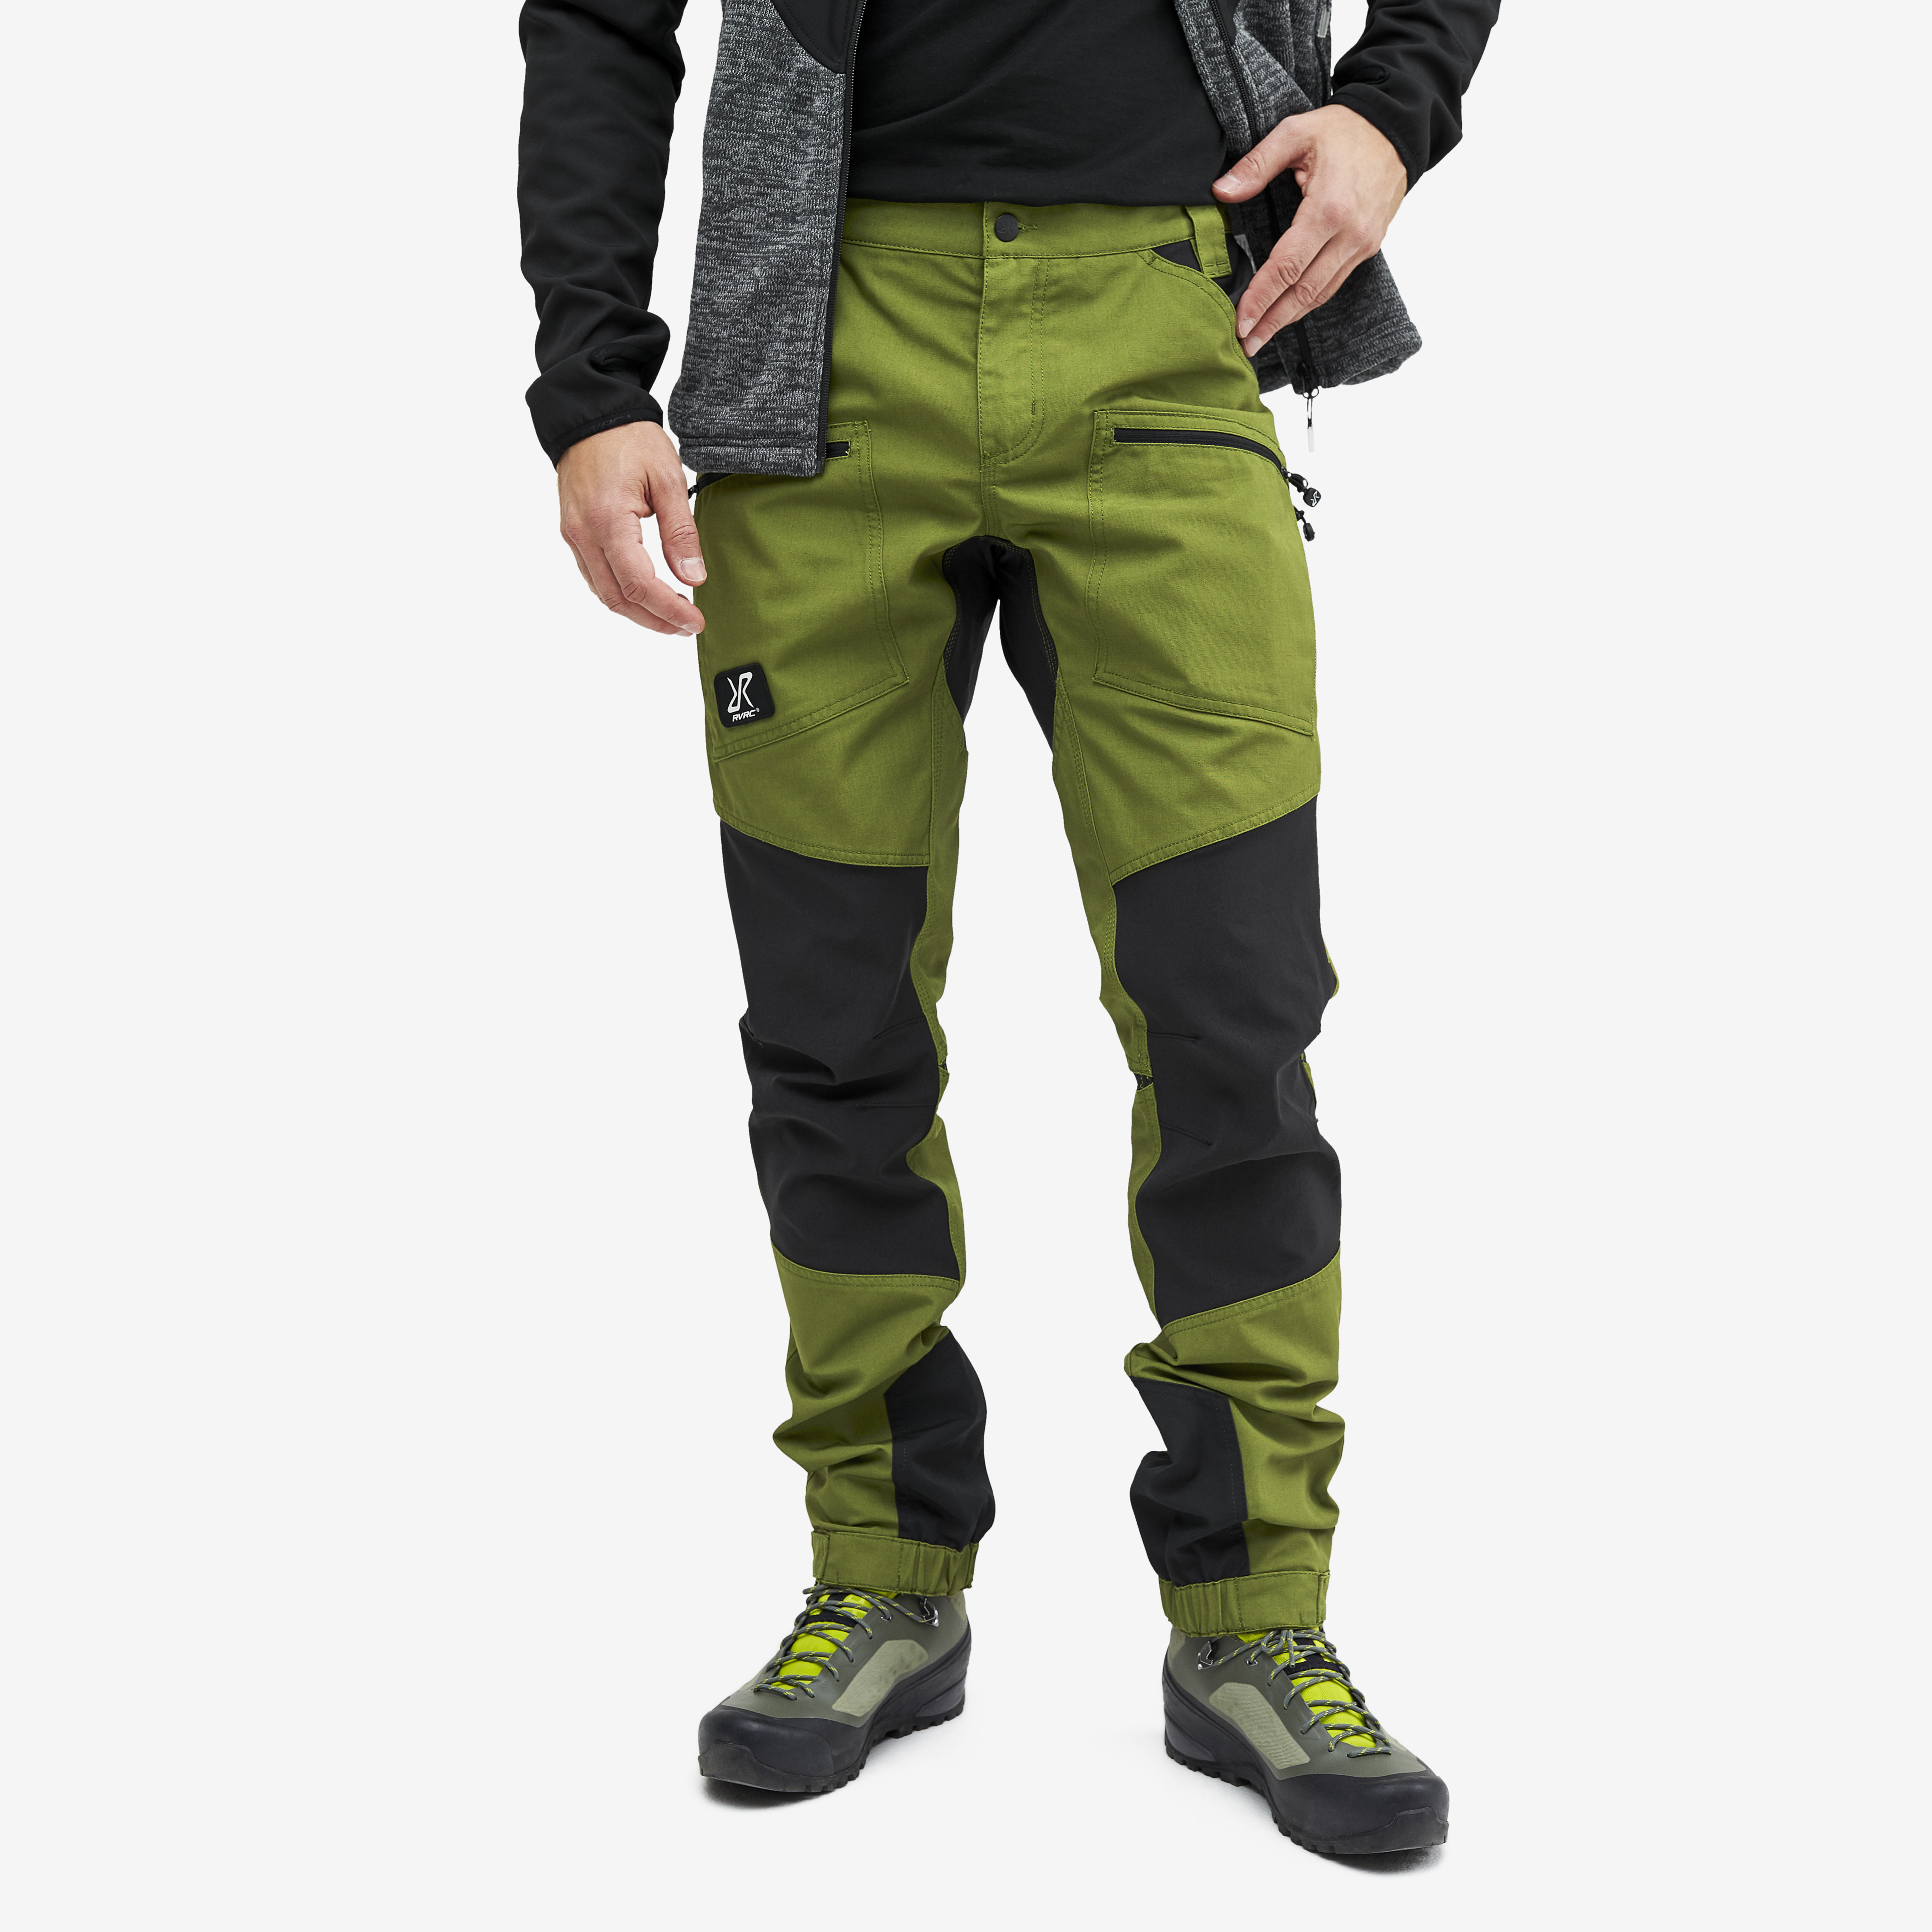 Nordwand Pro Pants Cactus Green Hombres